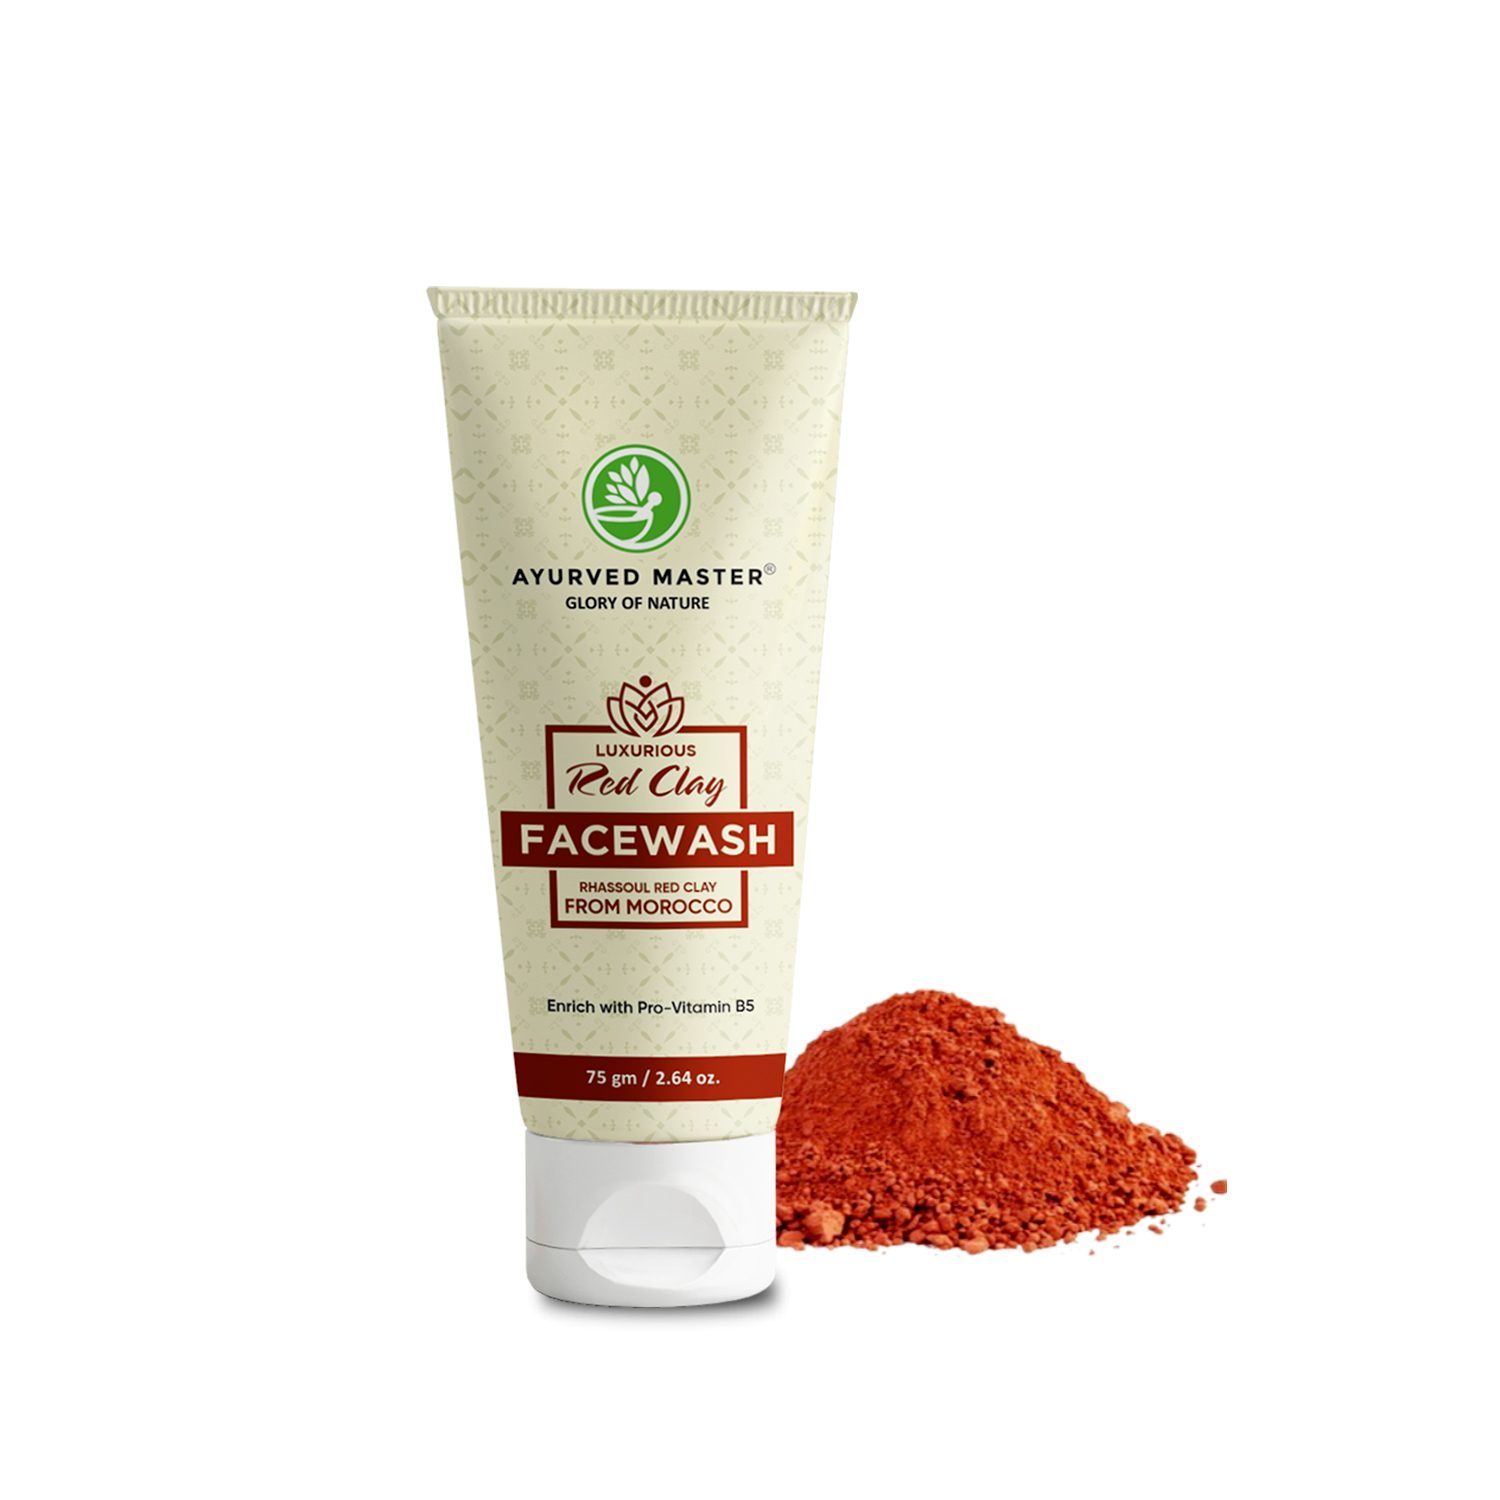 Natural Clay with Moroccan Red Clay and Pro Renew Complex Reduces wrinkles, minimizes pores, and provides moisture & hydrated skin Face Wash